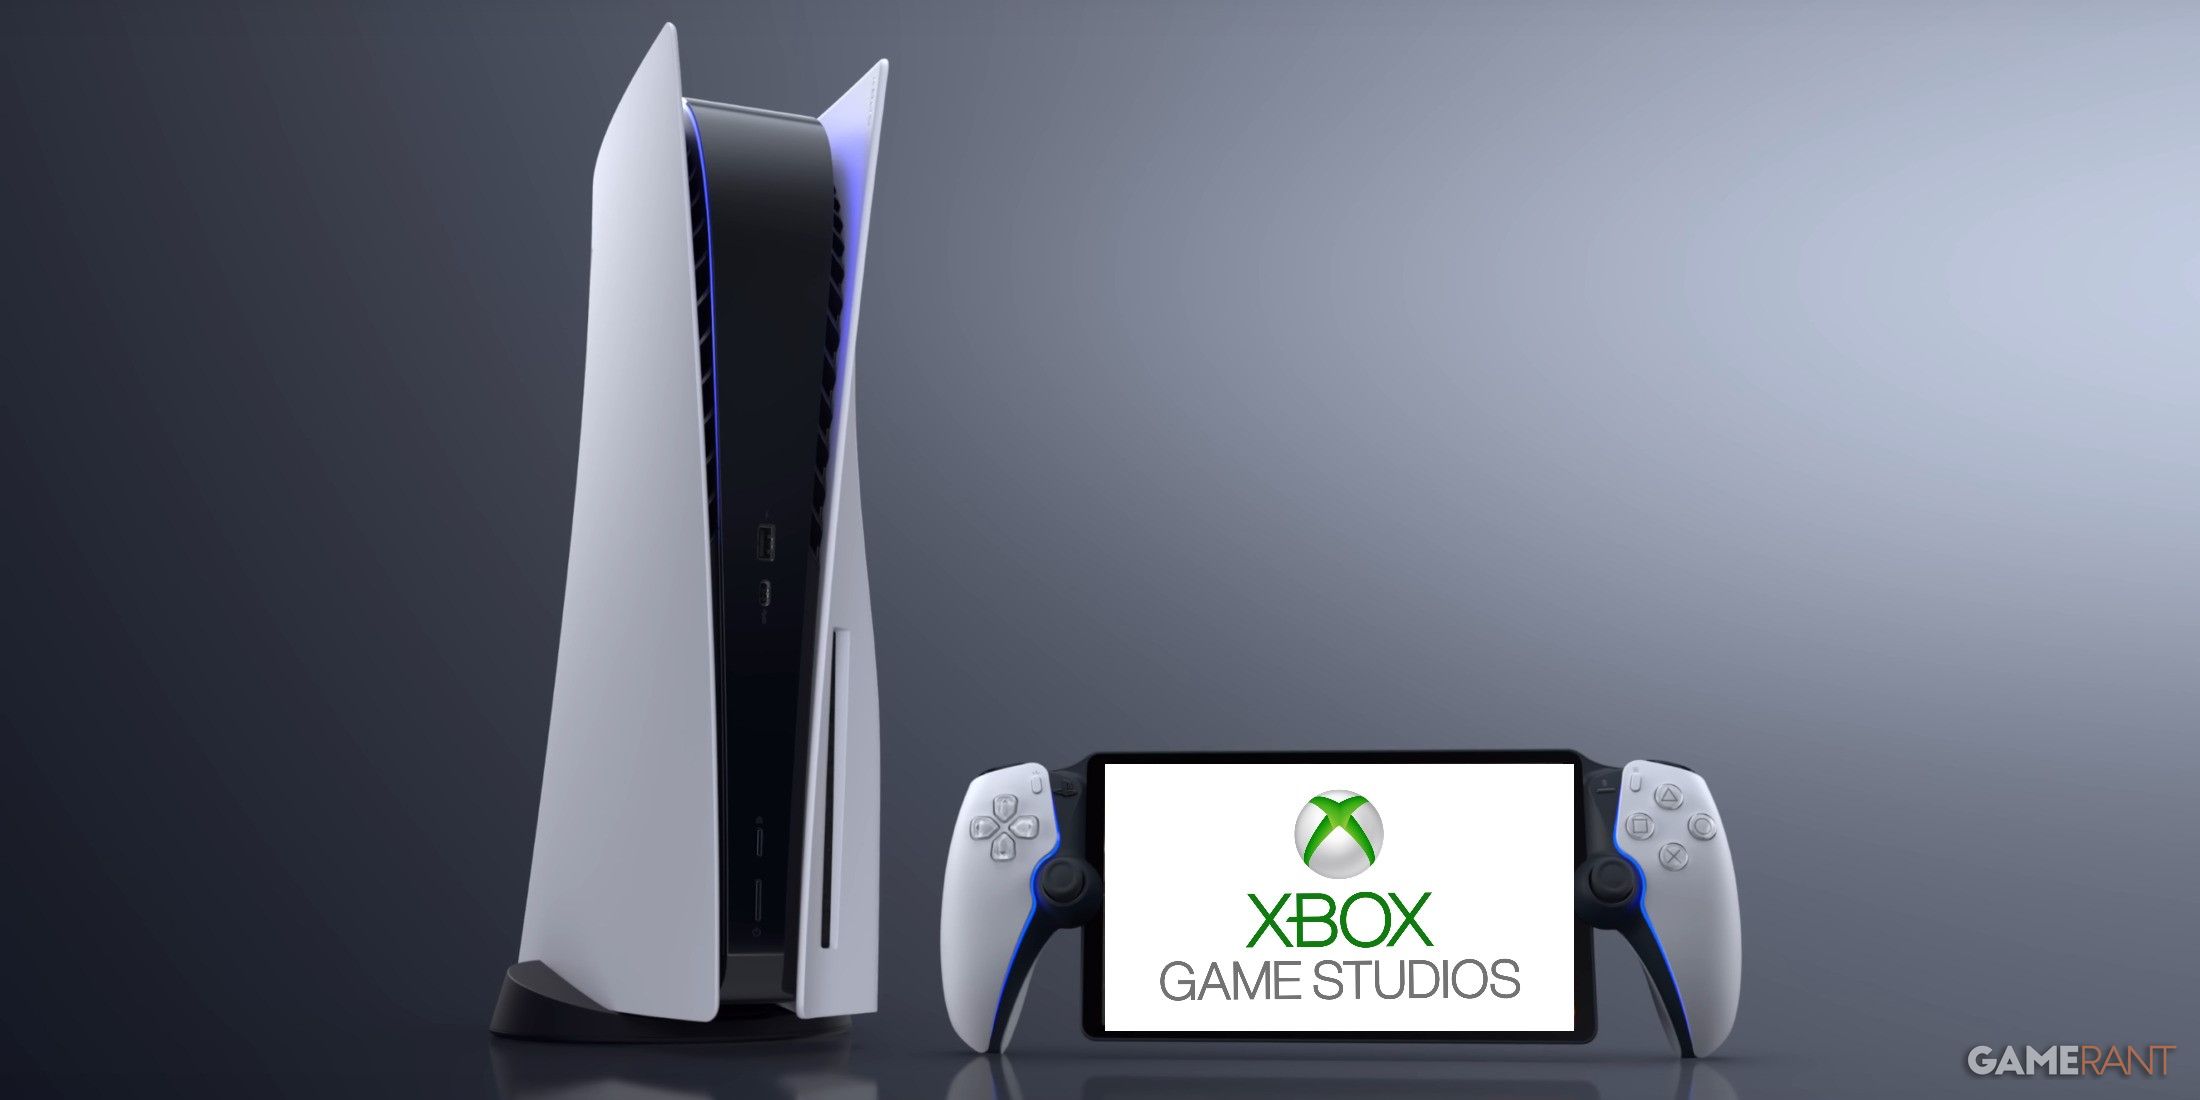 playstation 5 and portal with xbox game studios logo